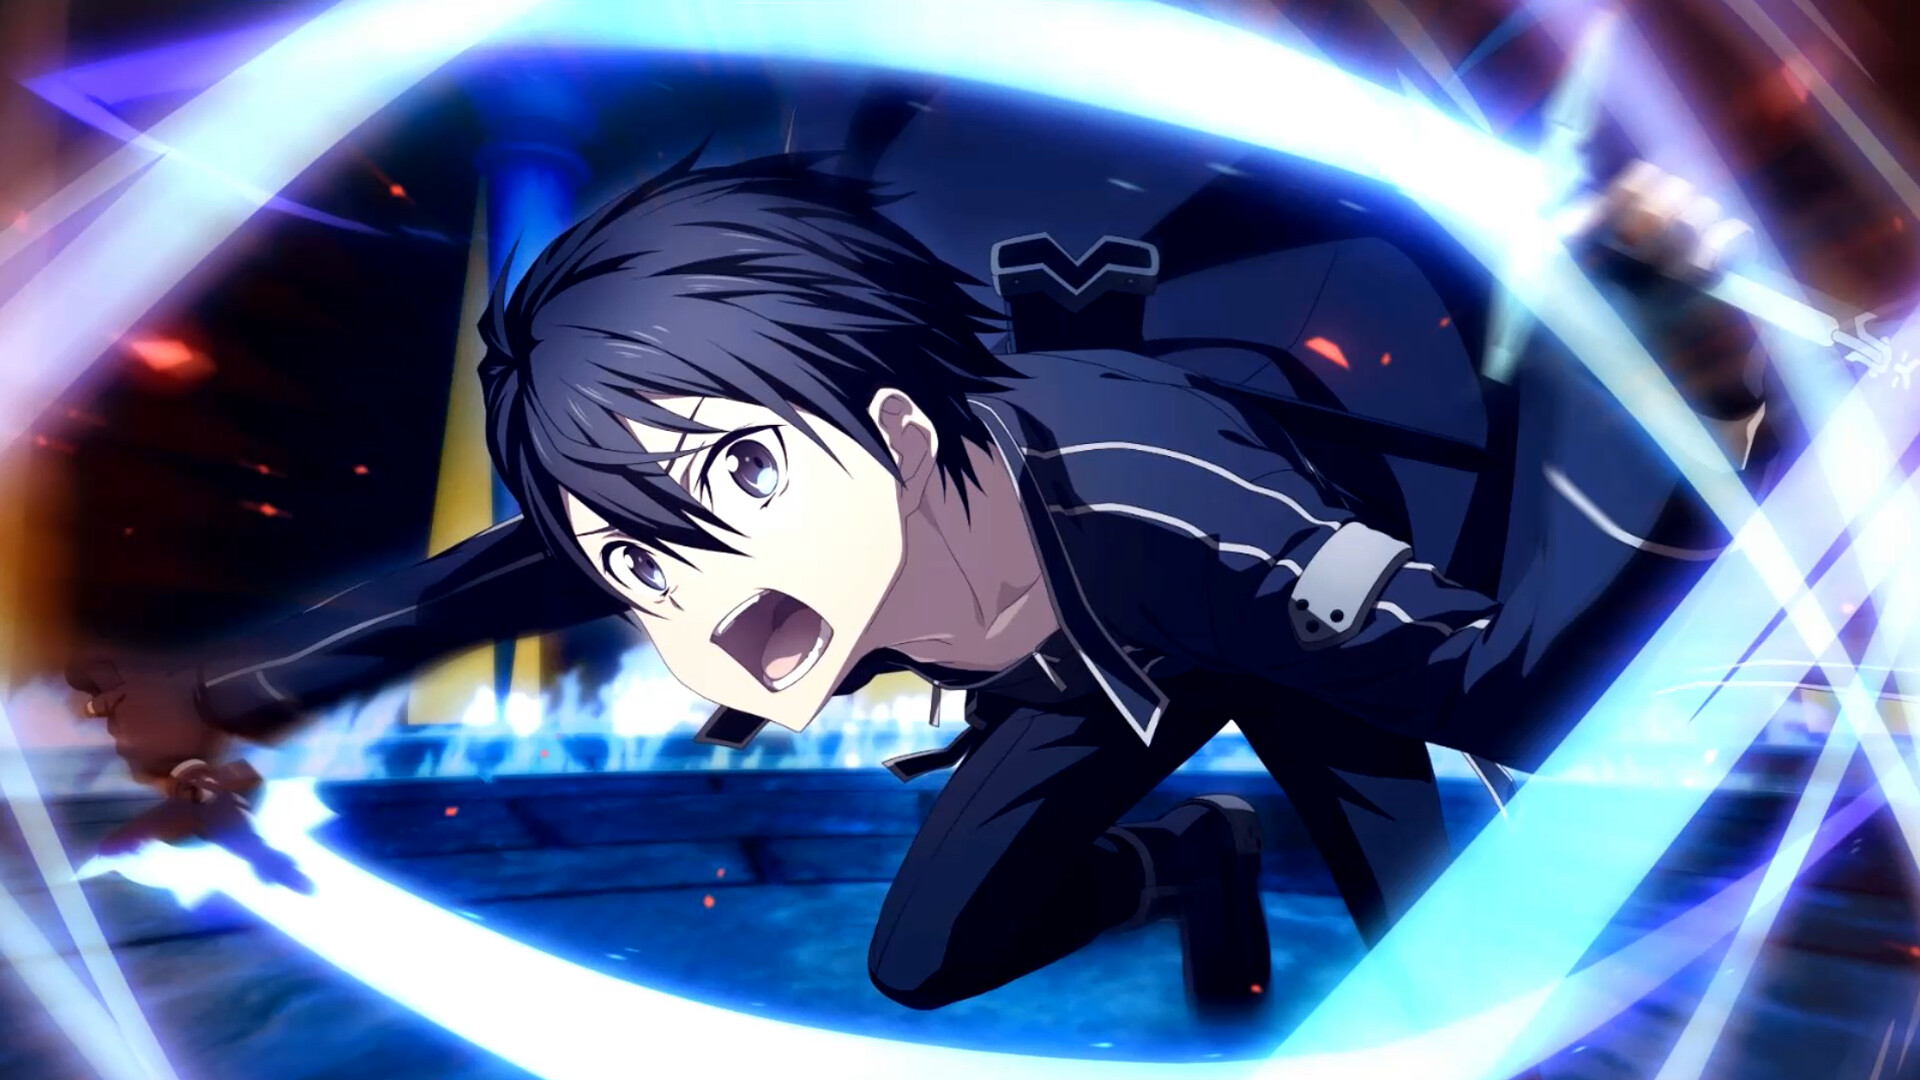 SAO Integral Factor Launching for PC via Steam